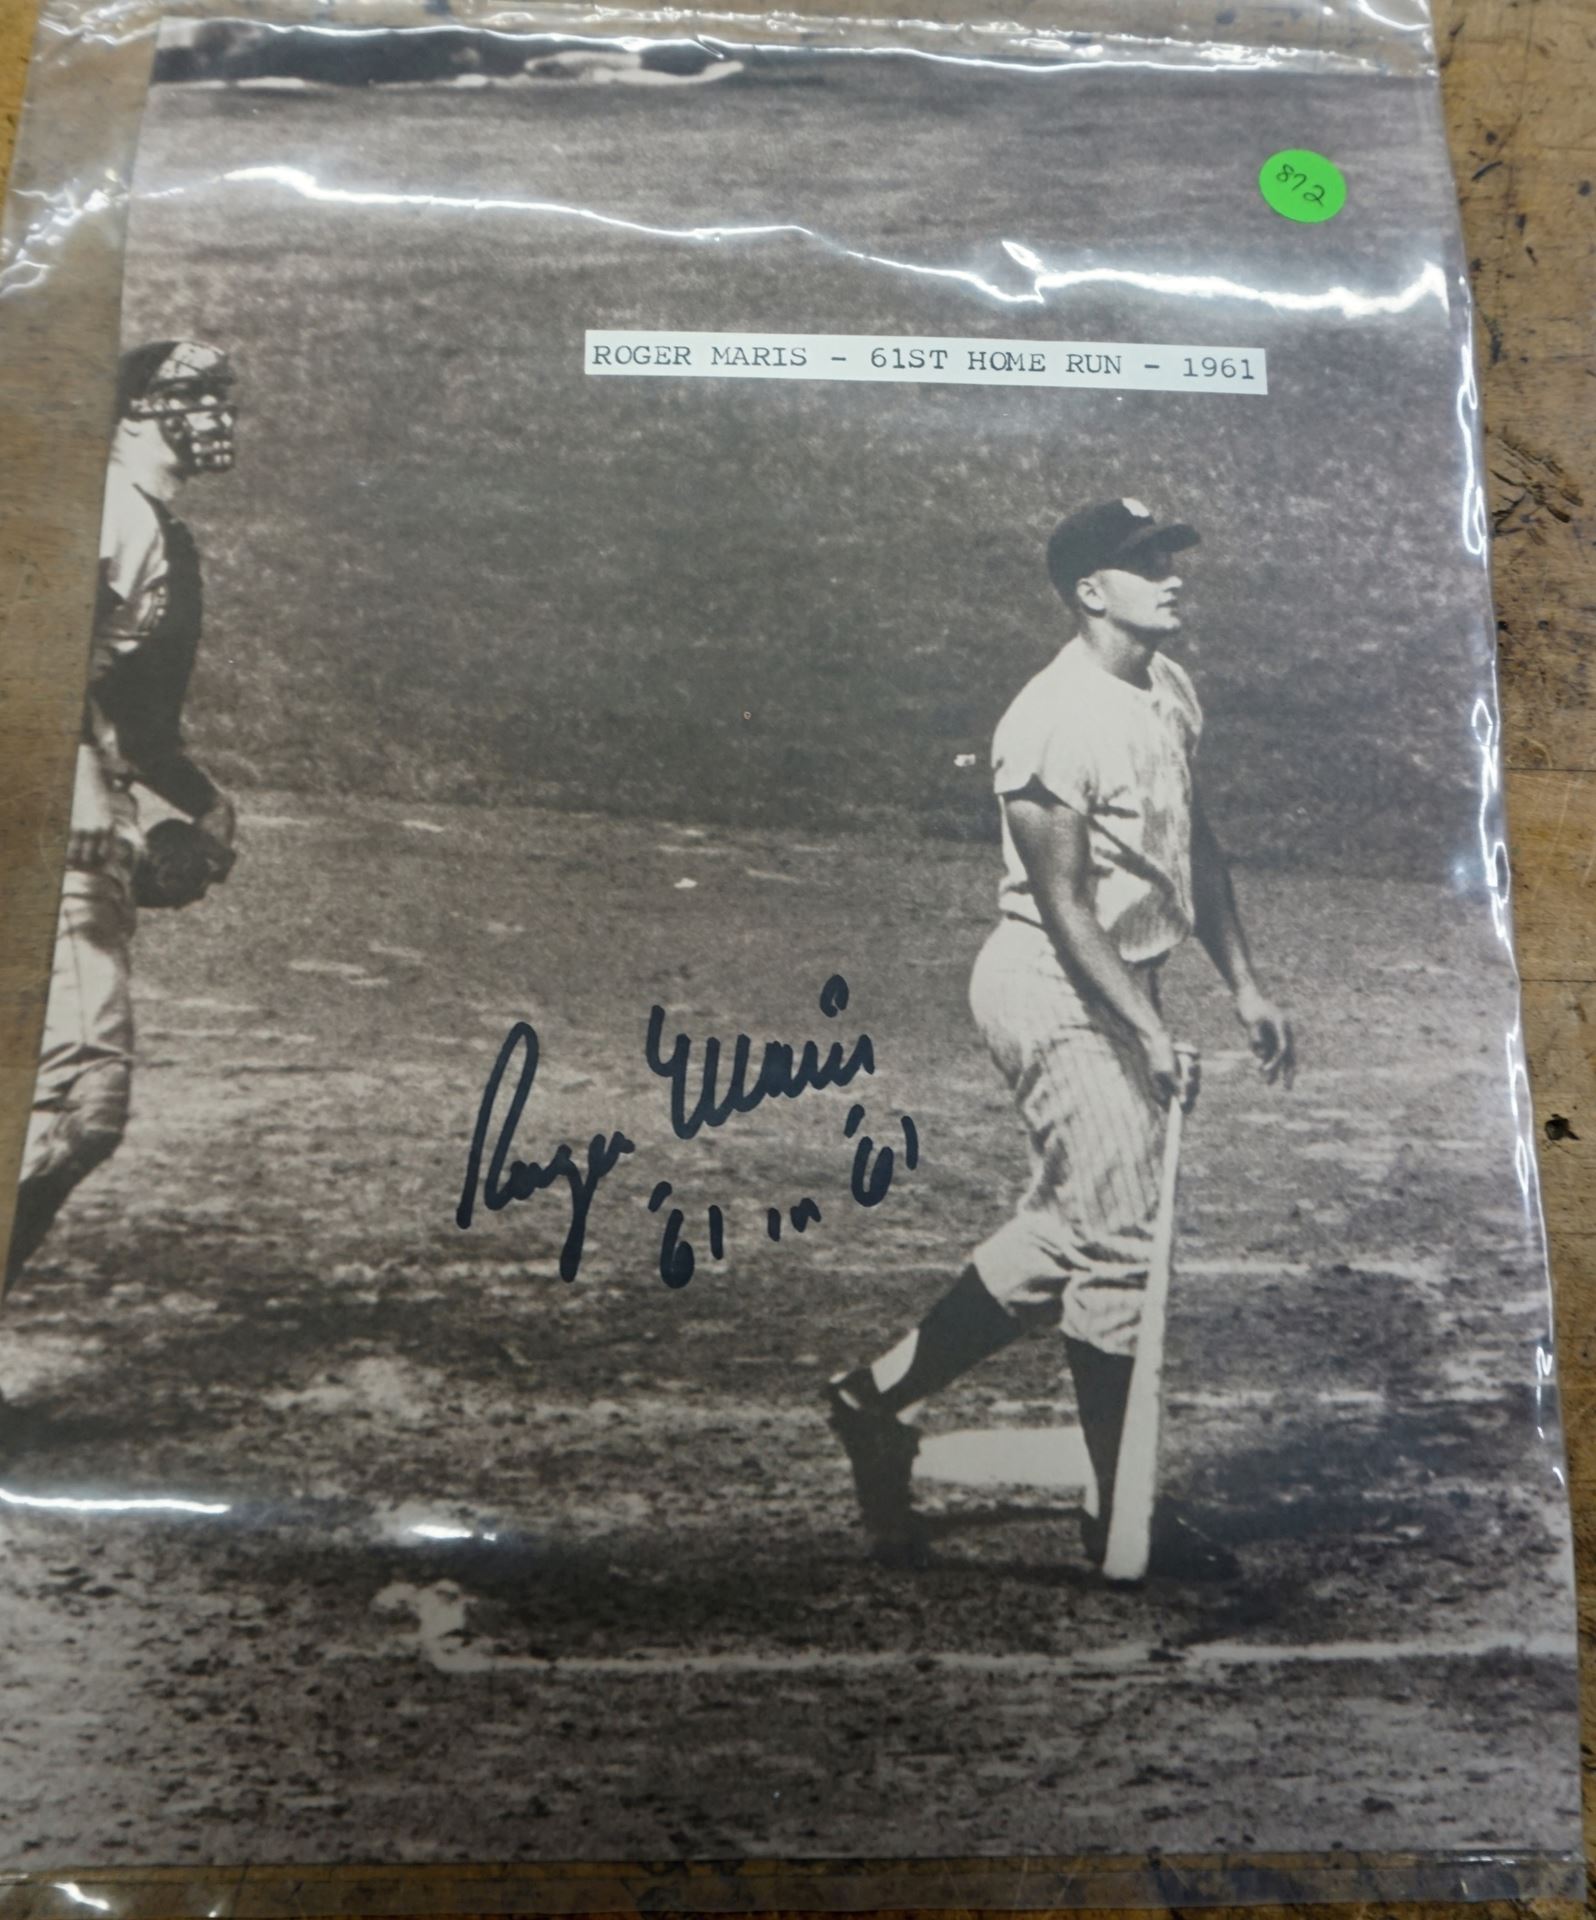 ROGER MARIS 61ST HOME RUN 1961 AUTOGRAPHED PHOTO 11X14 WITH COA. MINT  CONDITION. COLLECTIBLE.